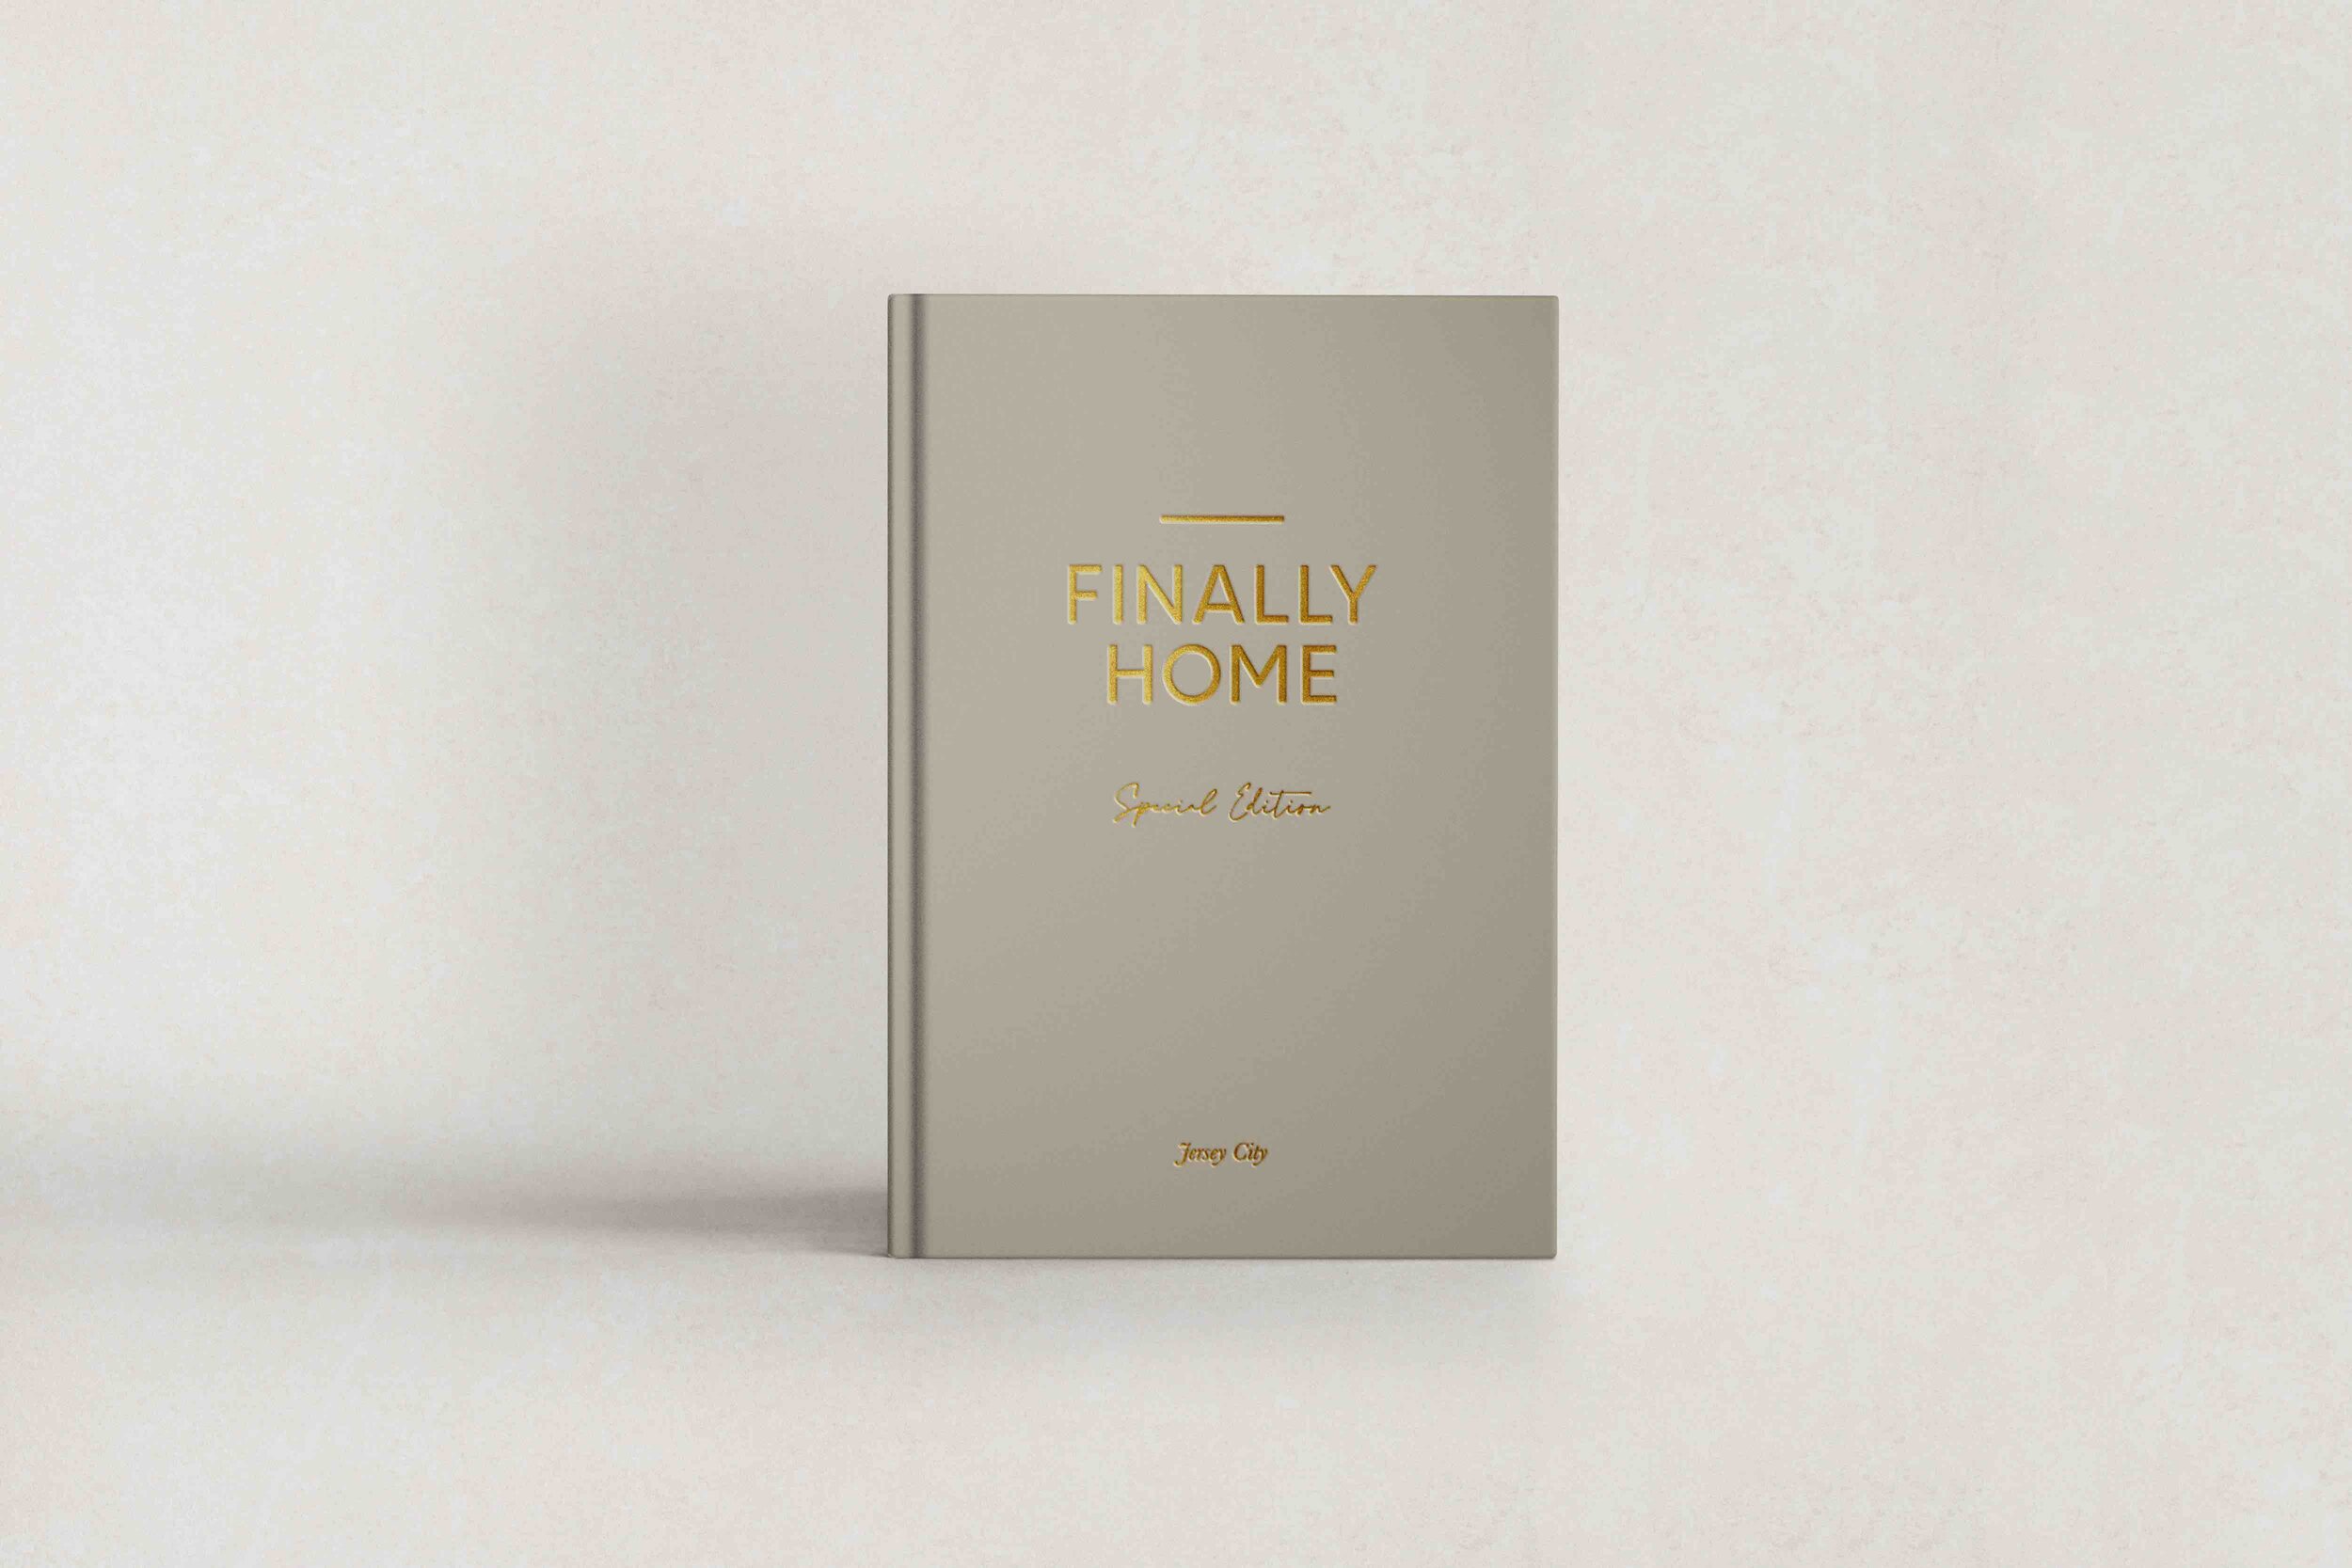 The Special Edition Jersey City Coffee Table Book -Finally Home